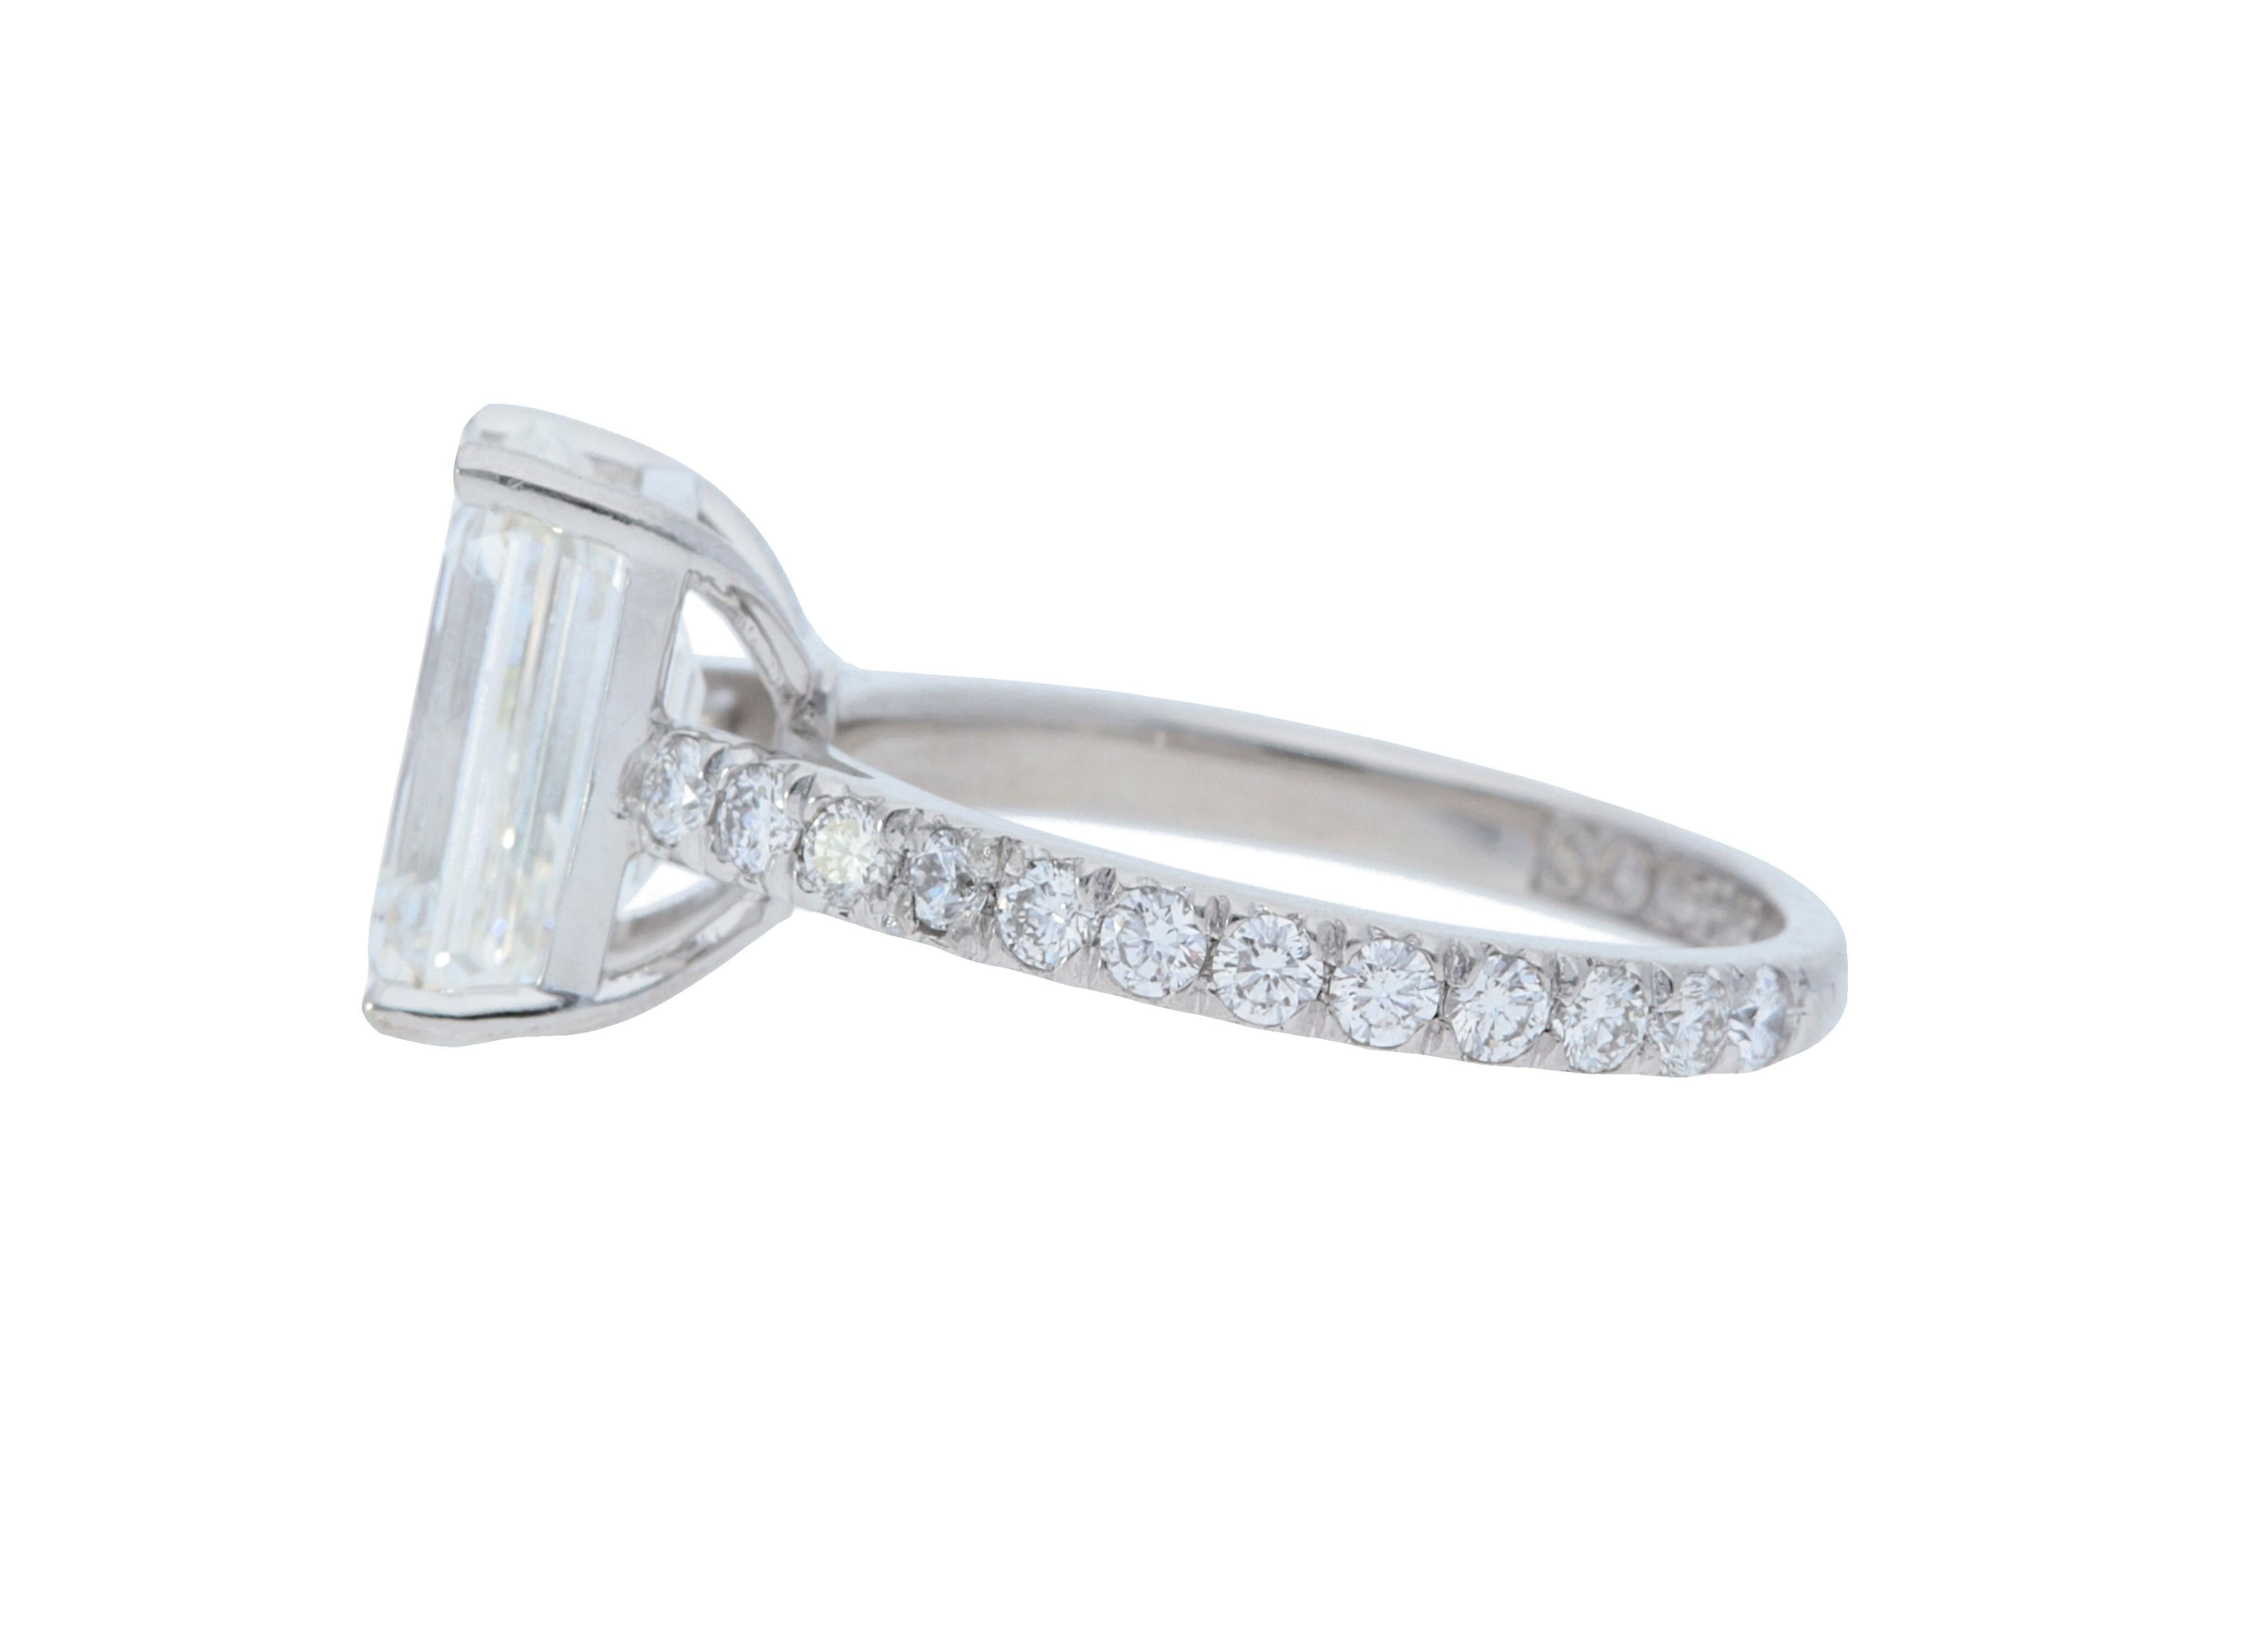 Contemporary GIA Certified 3.74 Carat Emerald Cut Diamond Ring For Sale